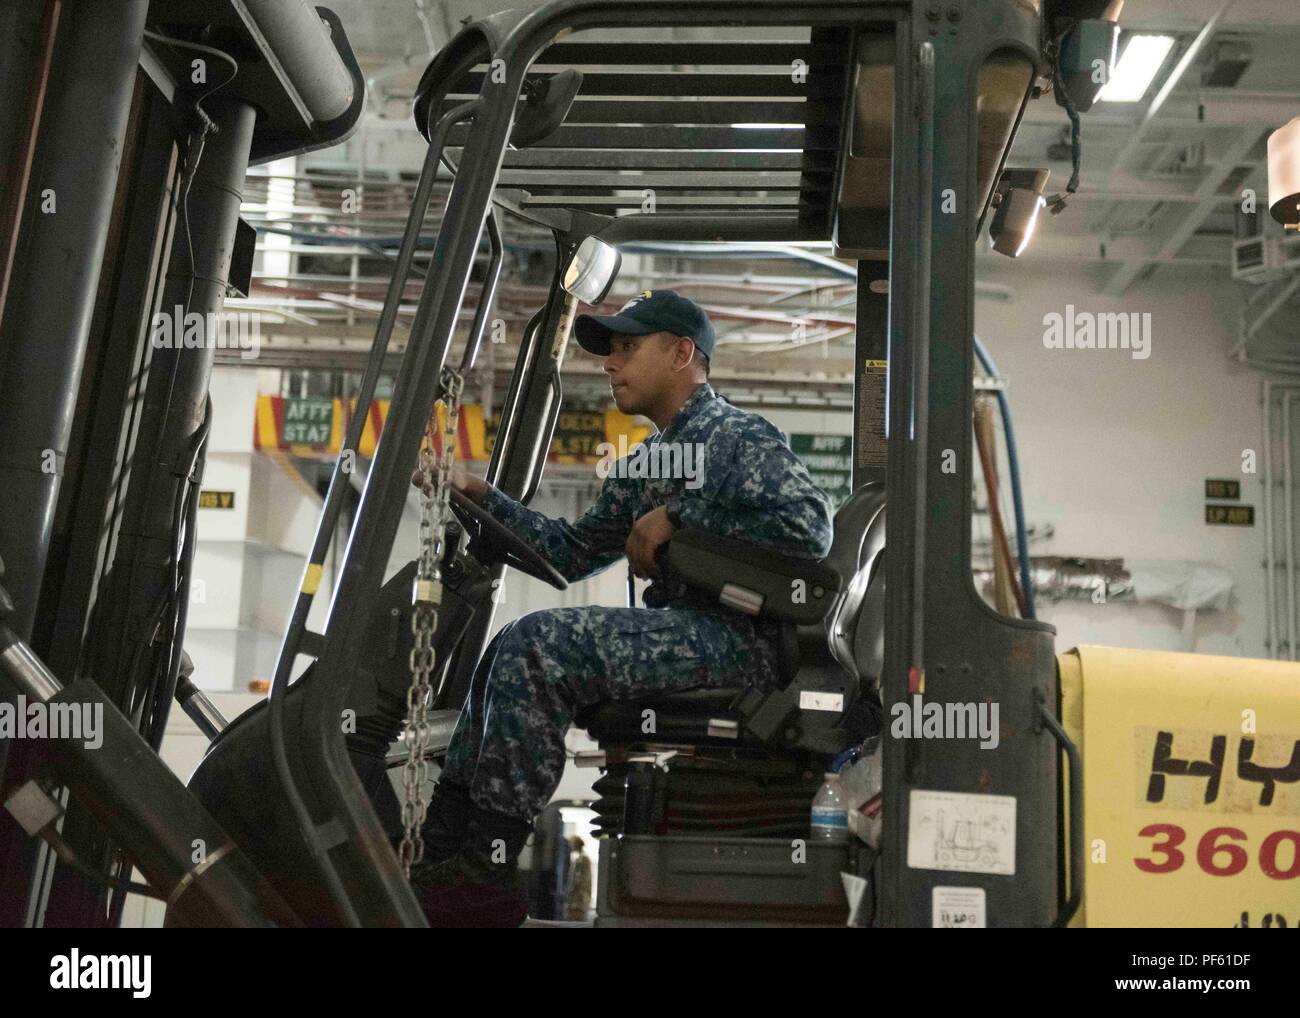 180814-N-MY760-093   PORTSMOUTH, Va. (Aug. 14, 2018) Aviation Boatswain's Mate (Handling) 3rd Class Theepan Perampalam, from Sinajama, Guam, operates a forklift aboard the aircraft carrier USS Dwight D. Eisenhower (CVN 69)(Ike). Ike is undergoing a Planned Incremental Availability (PIA) at Norfolk Naval Shipyard during the maintenance phase of the Optimized Fleet Response Plan (OFRP). (U.S. Navy photo by Mass Communication Specialist Seaman Apprentice Tyler Miller) Stock Photo